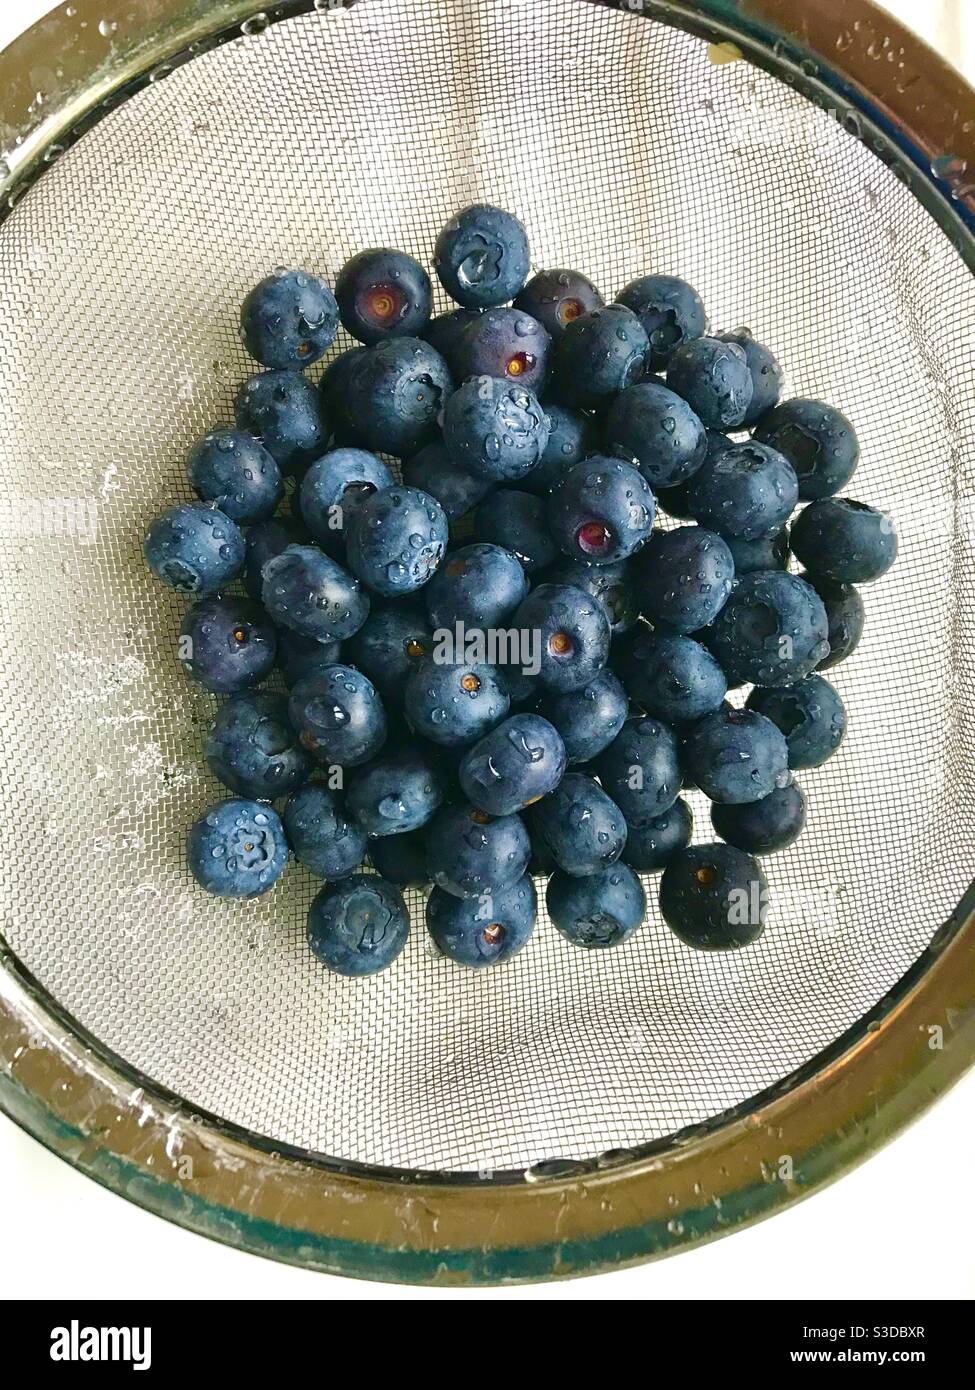 Blueberries in a sieve Stock Photo